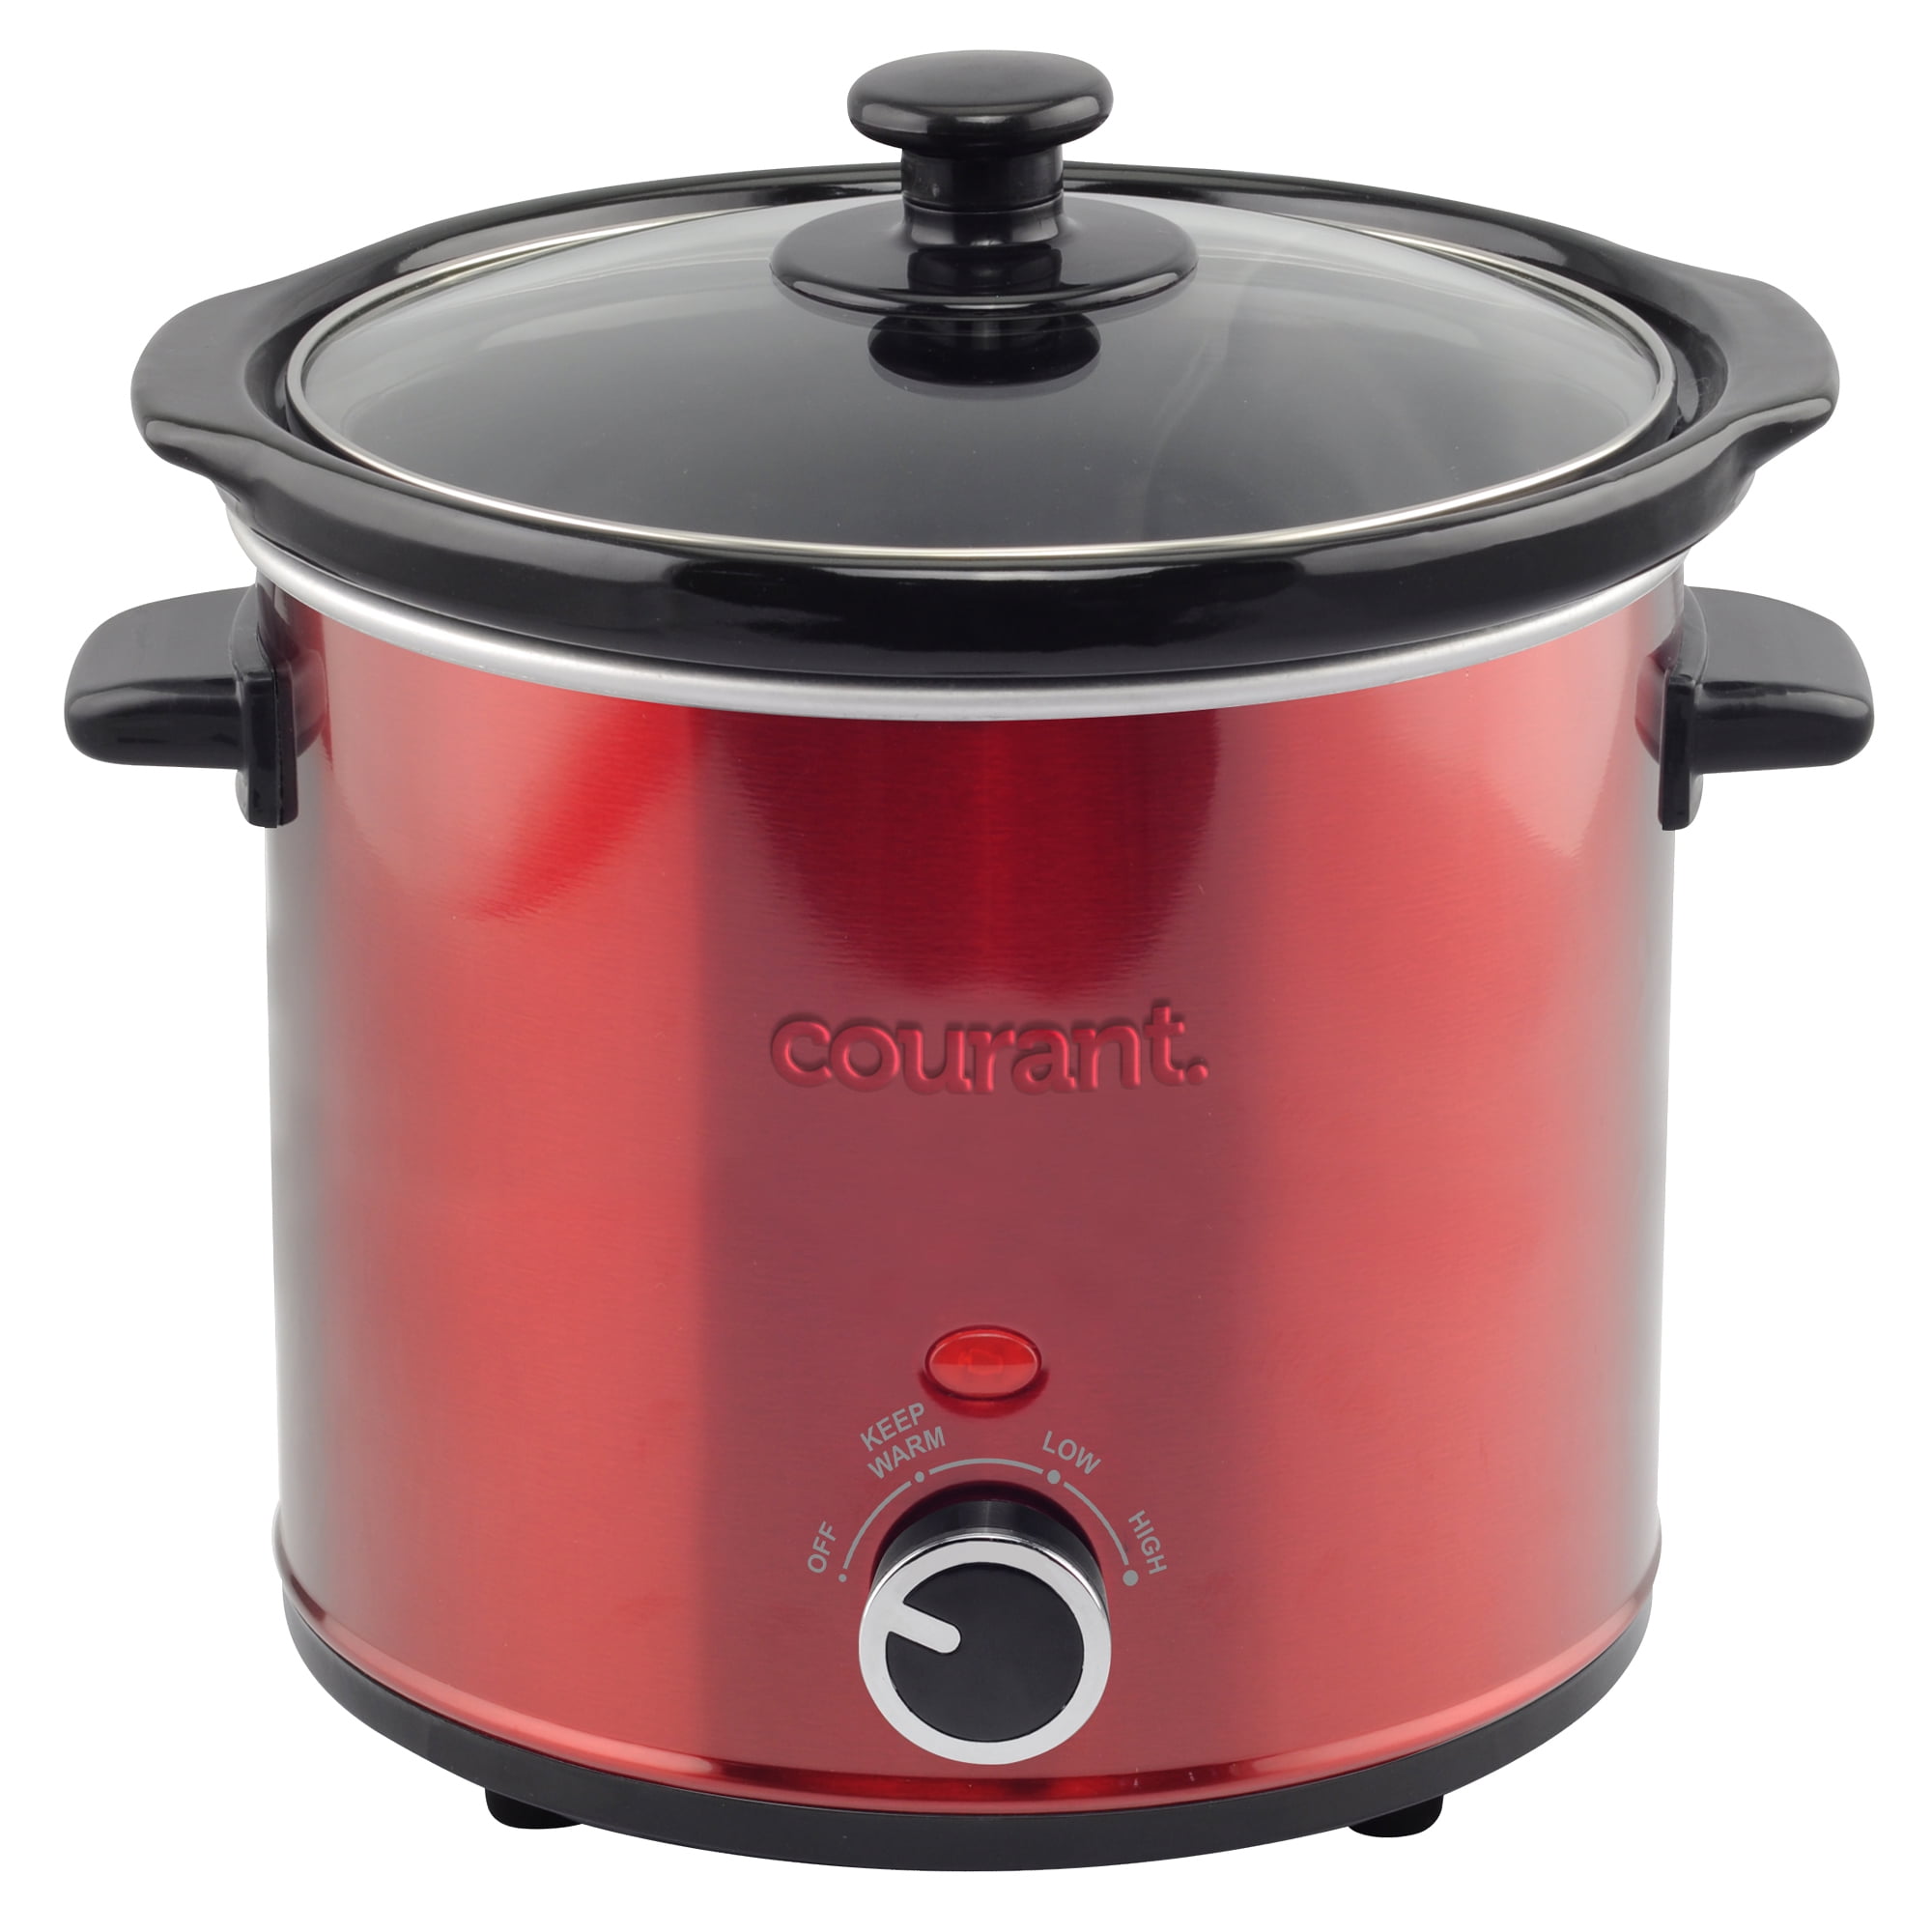 Crock-pot Denhoff 8.5 in. Red Ribbed Casserole with Lid